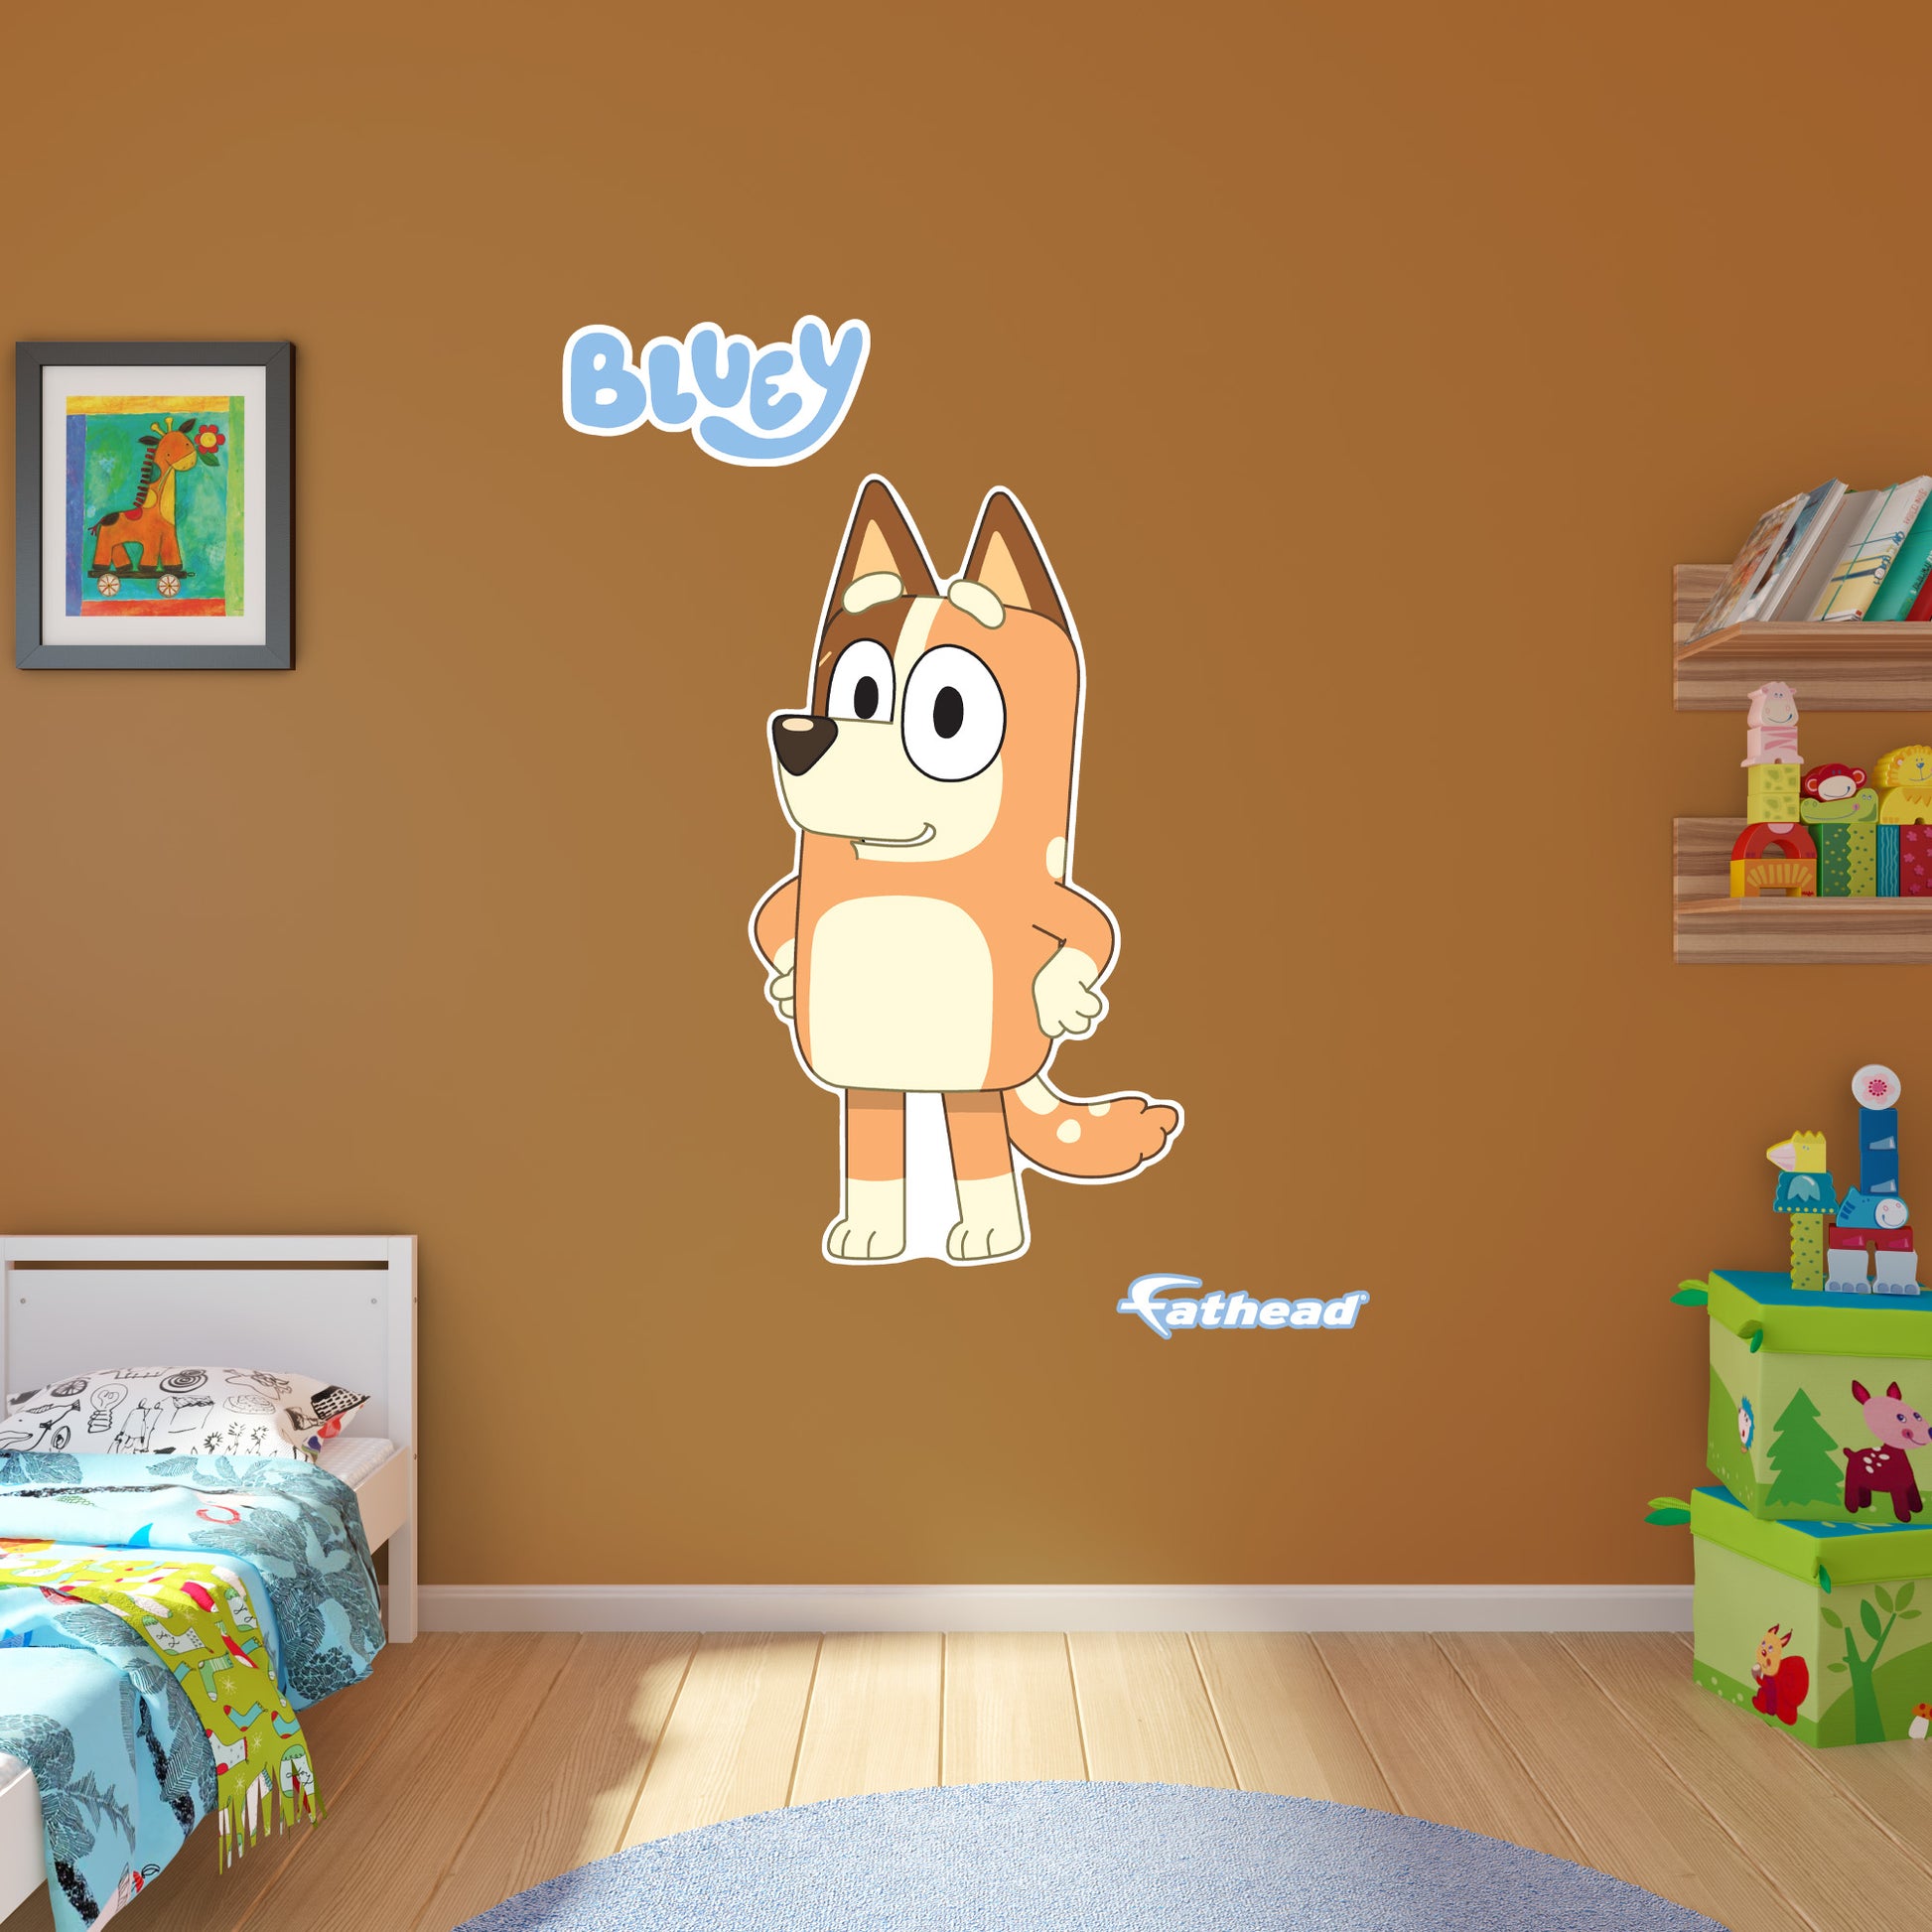 Giant Character +2 Decals  (28"W x 51"H) 